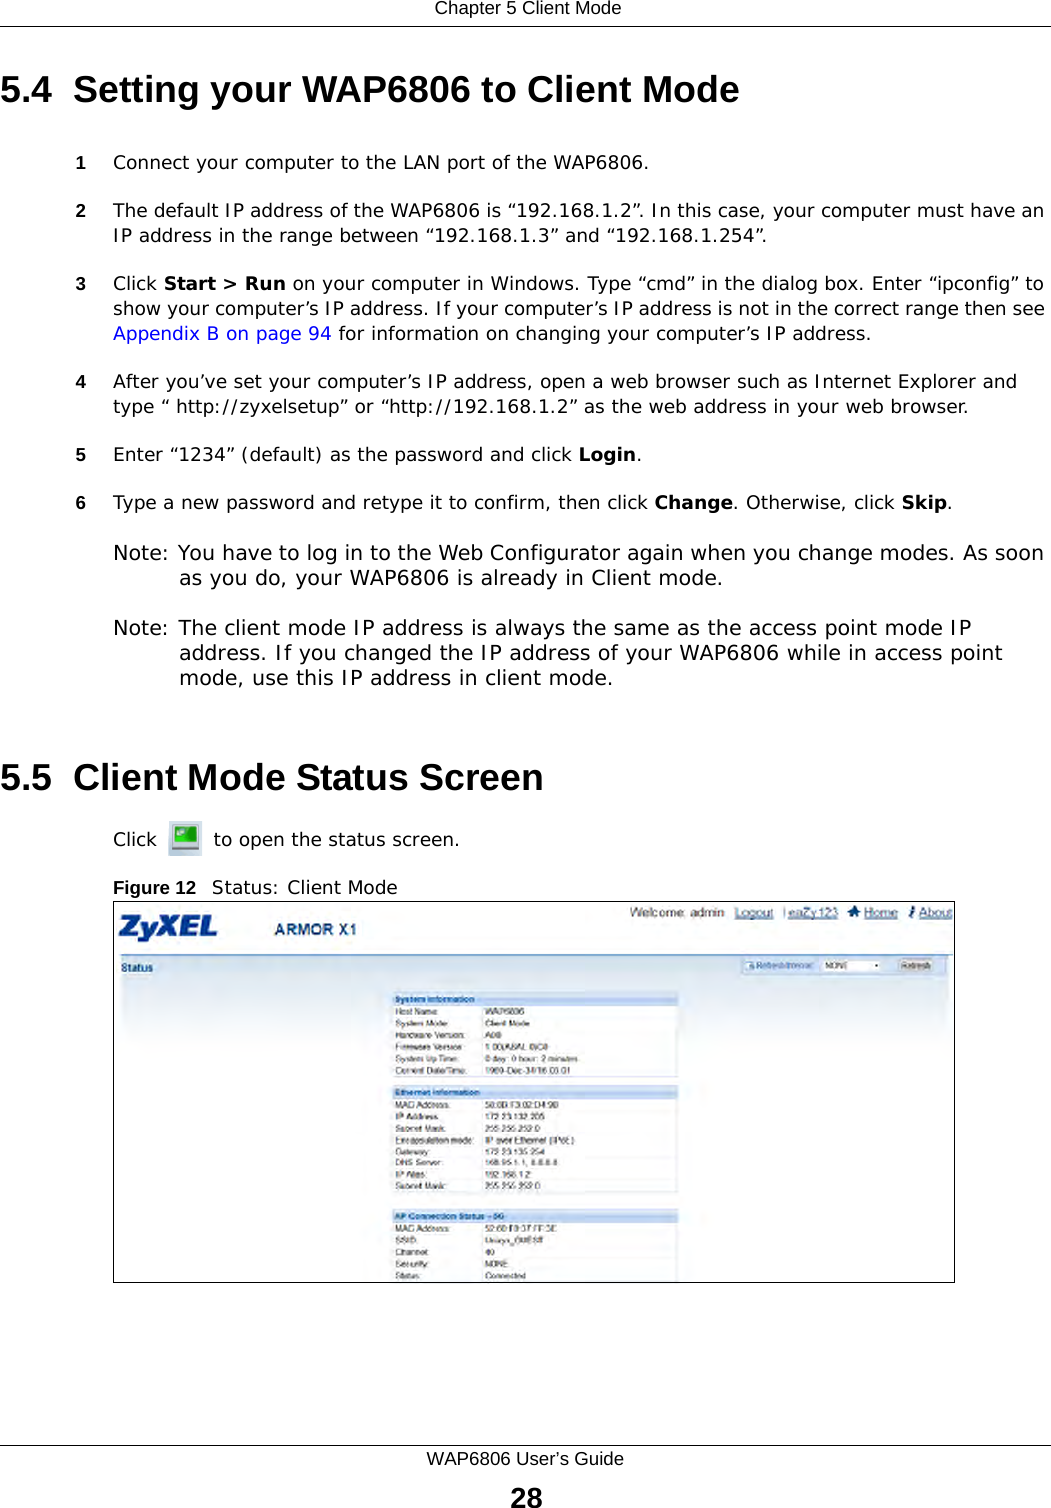  Chapter 5 Client ModeWAP6806 User’s Guide285.4  Setting your WAP6806 to Client Mode1Connect your computer to the LAN port of the WAP6806. 2The default IP address of the WAP6806 is “192.168.1.2”. In this case, your computer must have an IP address in the range between “192.168.1.3” and “192.168.1.254”.3Click Start &gt; Run on your computer in Windows. Type “cmd” in the dialog box. Enter “ipconfig” to show your computer’s IP address. If your computer’s IP address is not in the correct range then see Appendix B on page 94 for information on changing your computer’s IP address.4After you’ve set your computer’s IP address, open a web browser such as Internet Explorer and type “ http://zyxelsetup” or “http://192.168.1.2” as the web address in your web browser.5Enter “1234” (default) as the password and click Login.6Type a new password and retype it to confirm, then click Change. Otherwise, click Skip.Note: You have to log in to the Web Configurator again when you change modes. As soon as you do, your WAP6806 is already in Client mode.Note: The client mode IP address is always the same as the access point mode IP address. If you changed the IP address of your WAP6806 while in access point mode, use this IP address in client mode. 5.5  Client Mode Status ScreenClick   to open the status screen. Figure 12   Status: Client Mode 